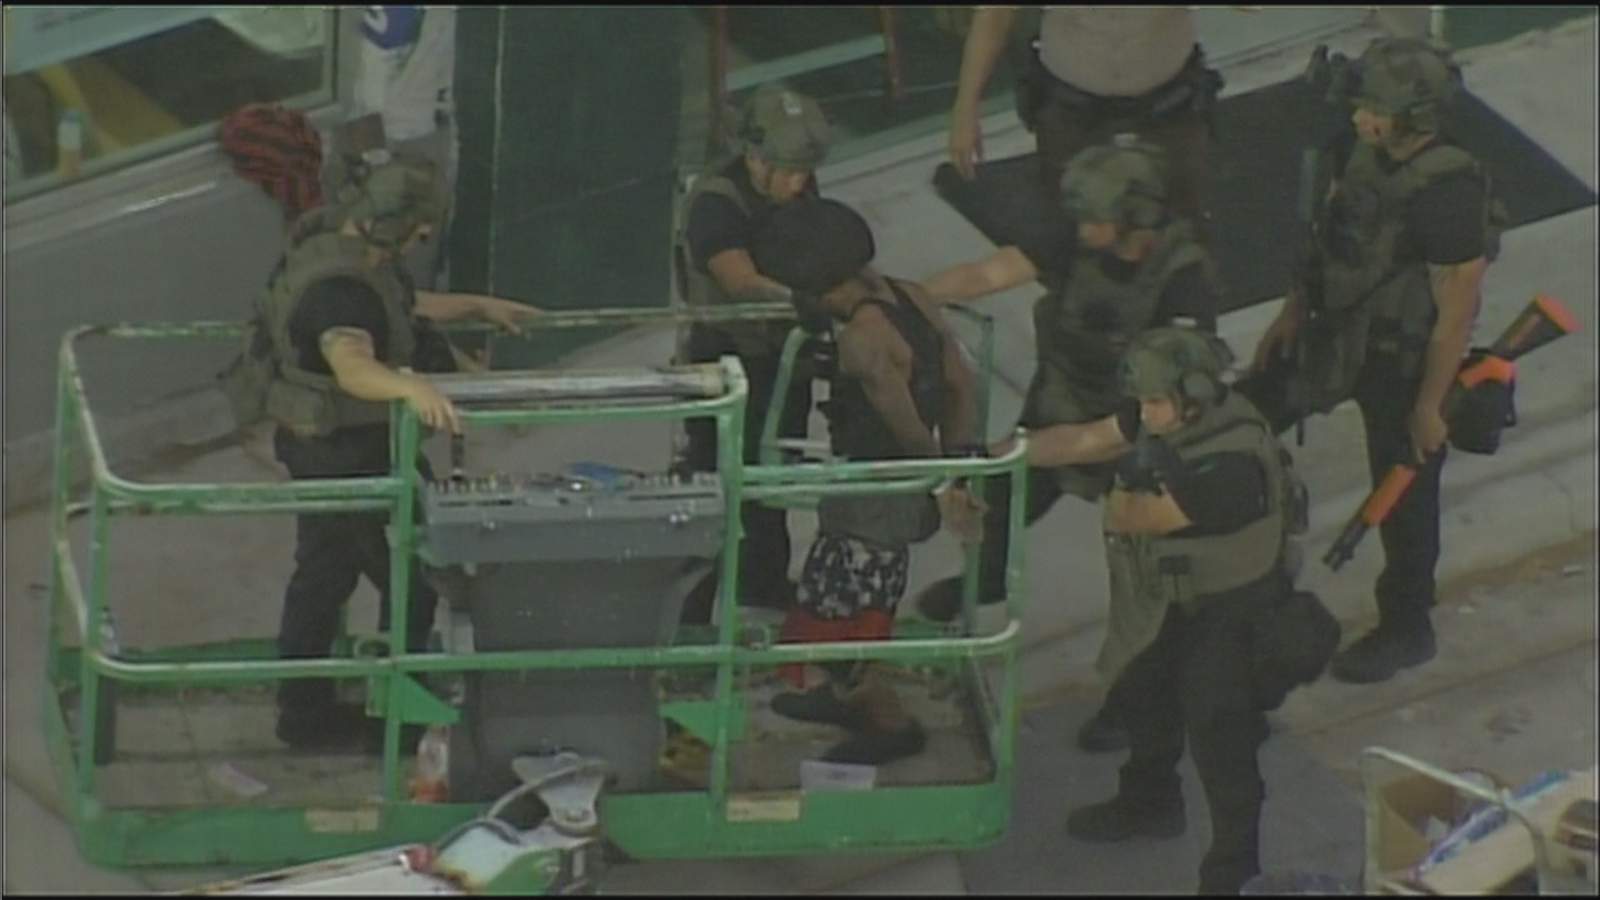 Man in custody after barricading himself on the roof of a McDonald’s in Northwest Miami-Dade